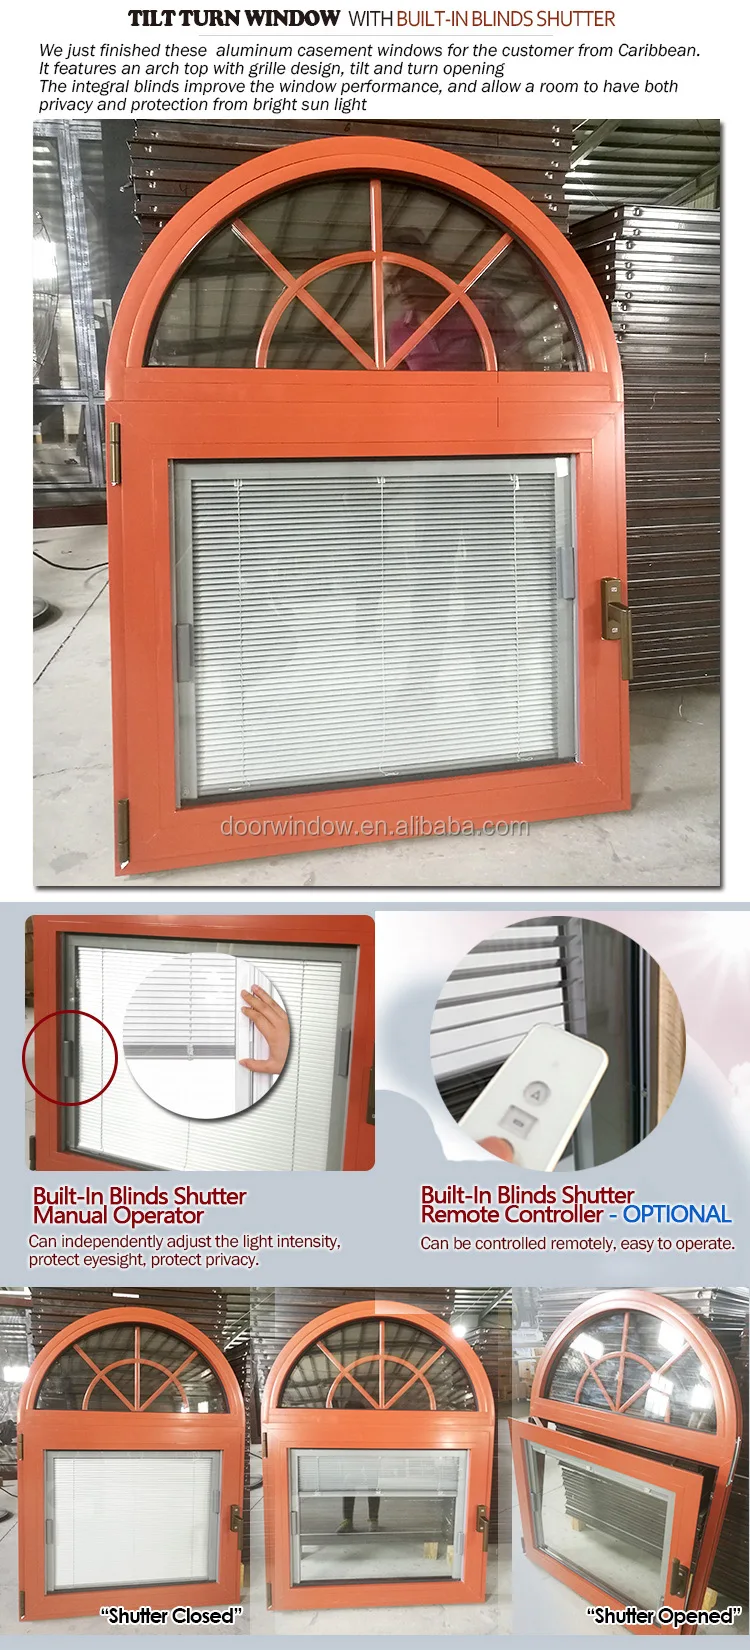 Awning windows standard bathroom window size with flyscreen blind inside